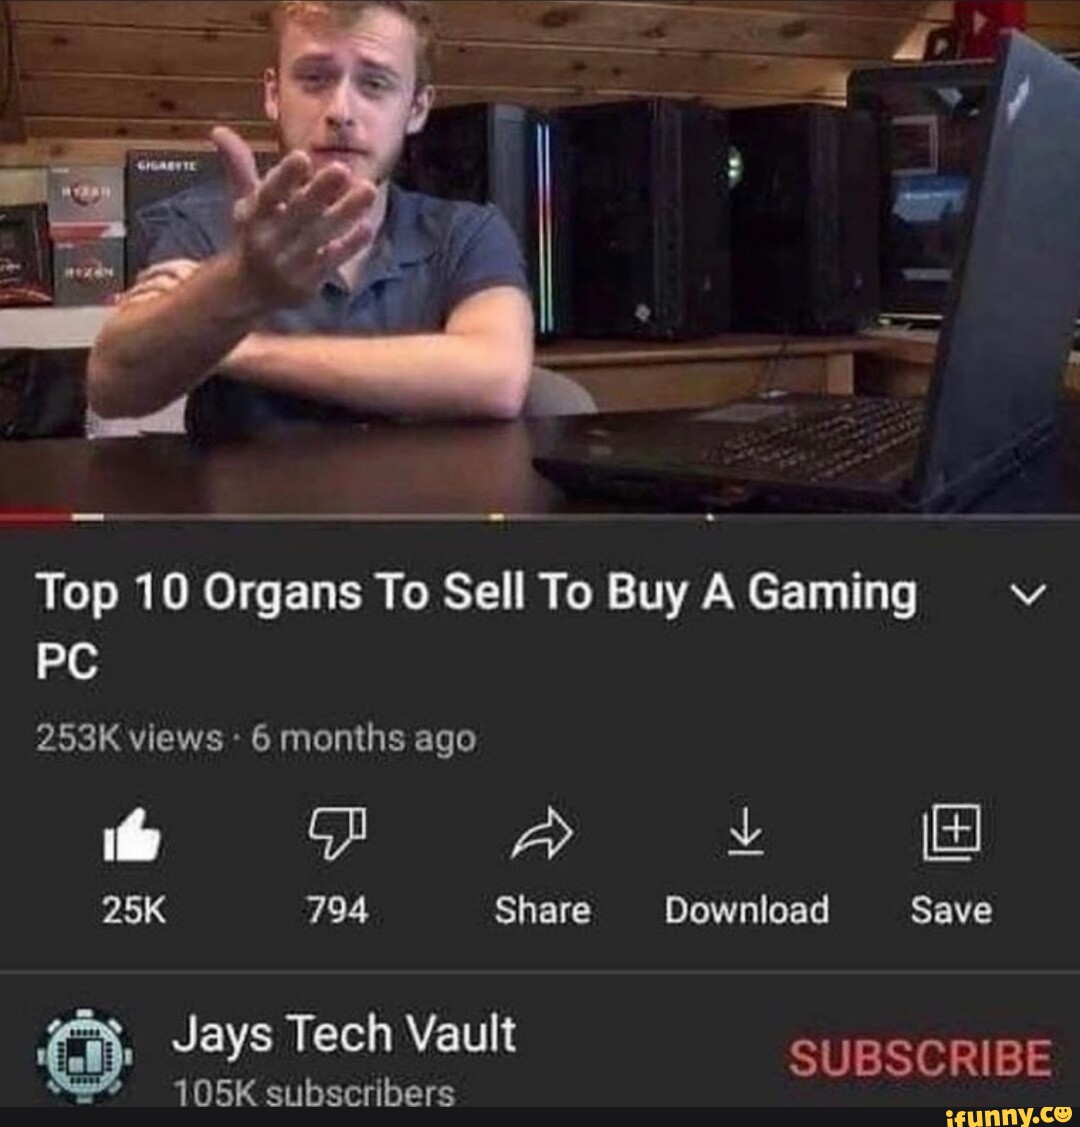 Top Organs To Sell To Buy A Gaming PC 253K views 6 months ago 794 Share Download Save Jays Vault SUBSCRIBE 105K - iFunny